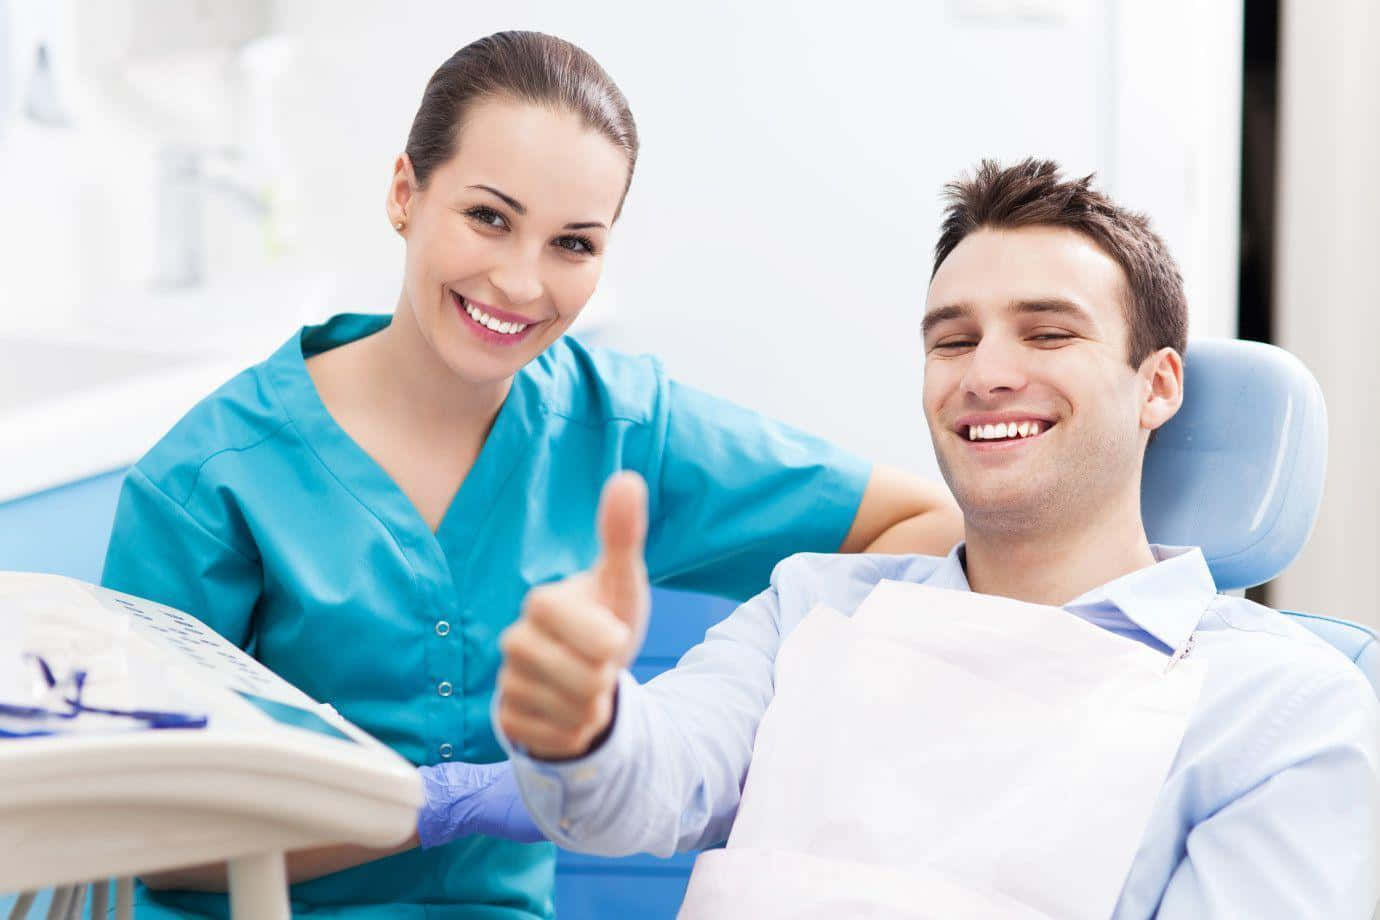 A healthy, happy smile starts with proper dental care